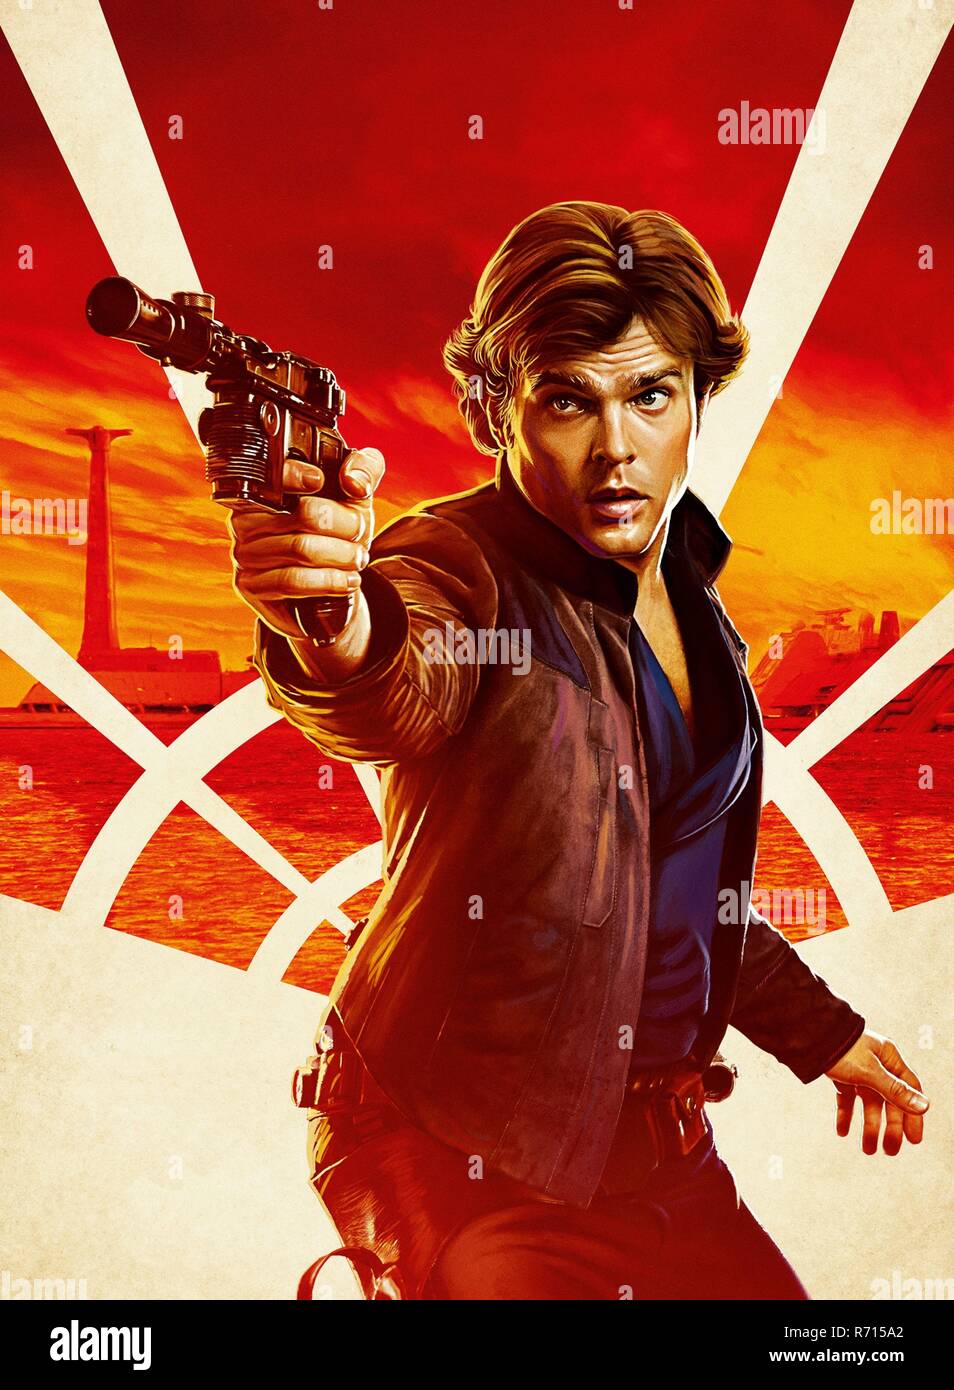 RELEASE DATE: May 25, 2018 TITLE: Solo: A Star Wars Story STUDIO: Lucasfilm  DIRECTOR: Ron Howard PLOT: During an adventure into the criminal  underworld, Han Solo meets his future co-pilot Chewbacca and